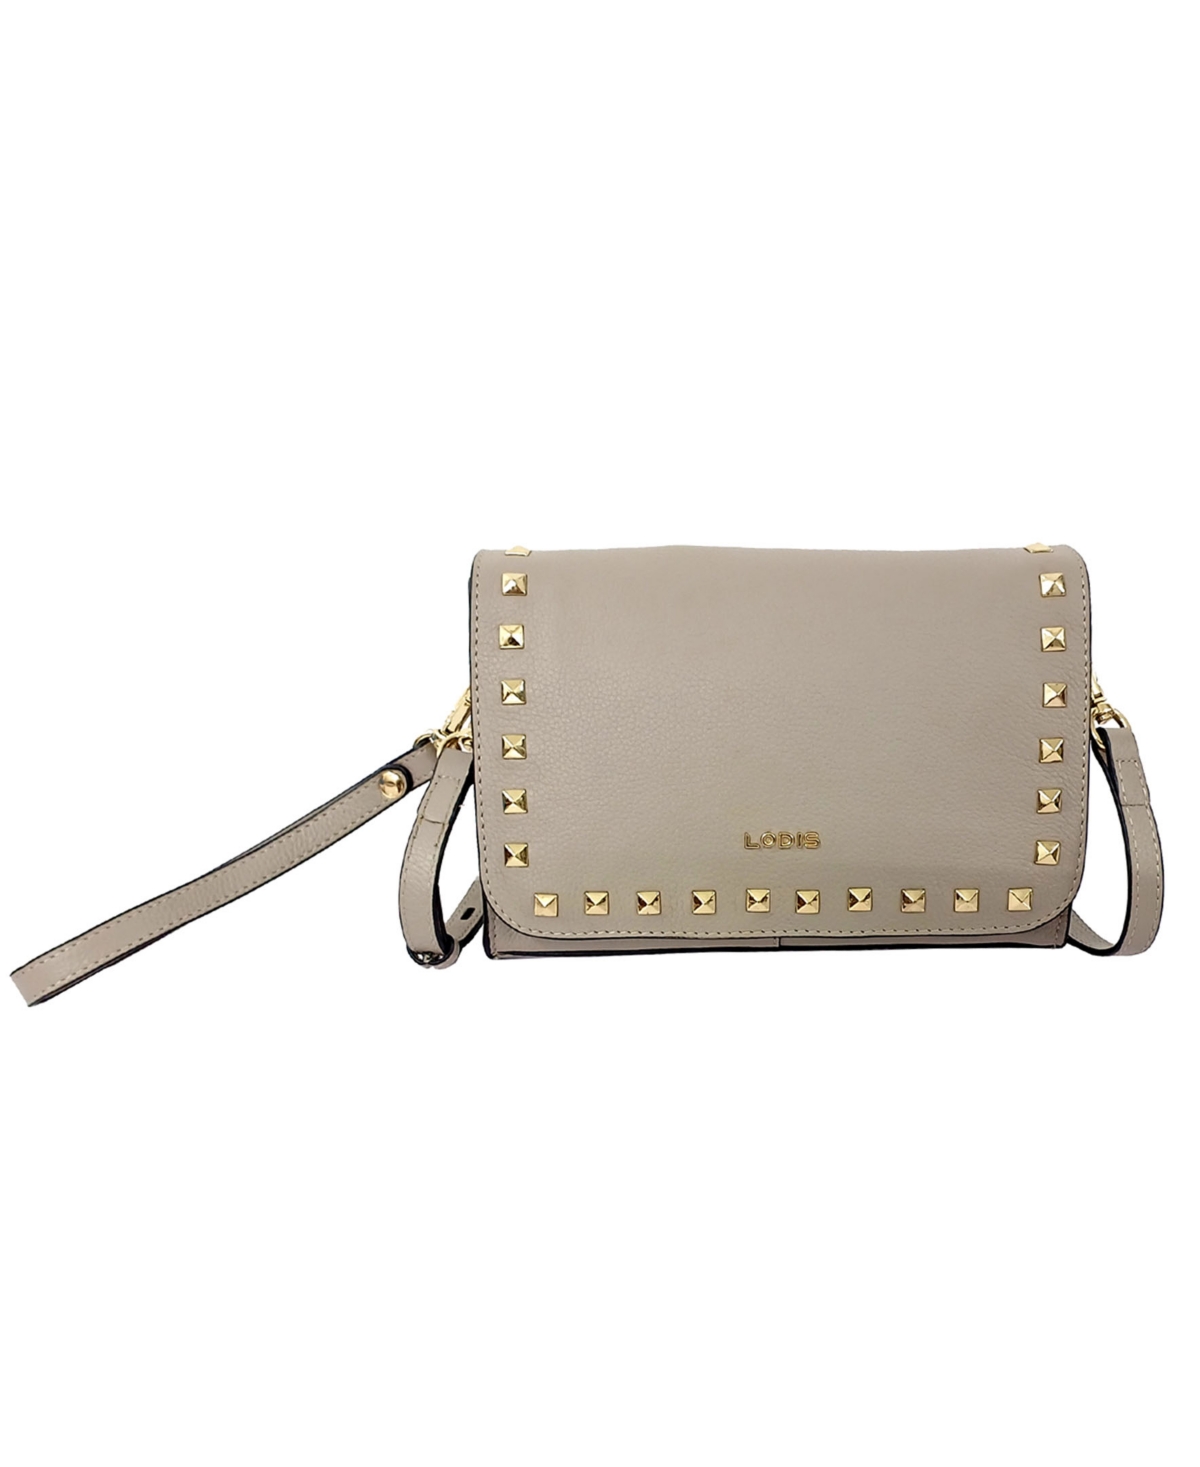 Lodis Rio Adjustable Crossbody Bag With Studs In Ash